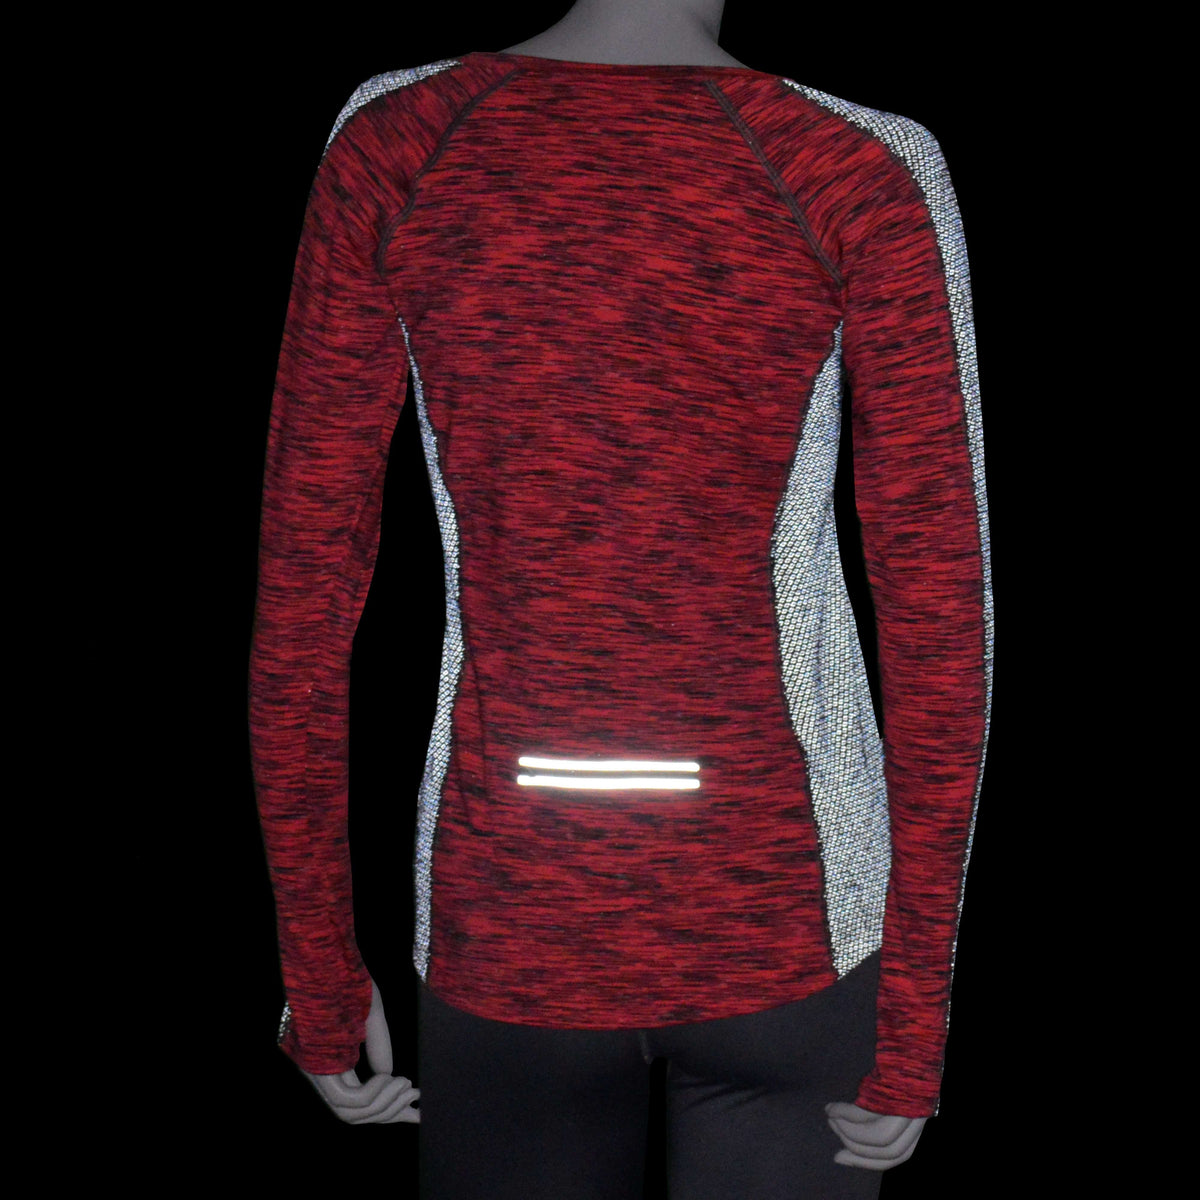 Long Sleeve Reflective Women's Piper Tee in Afterglow/Graphite